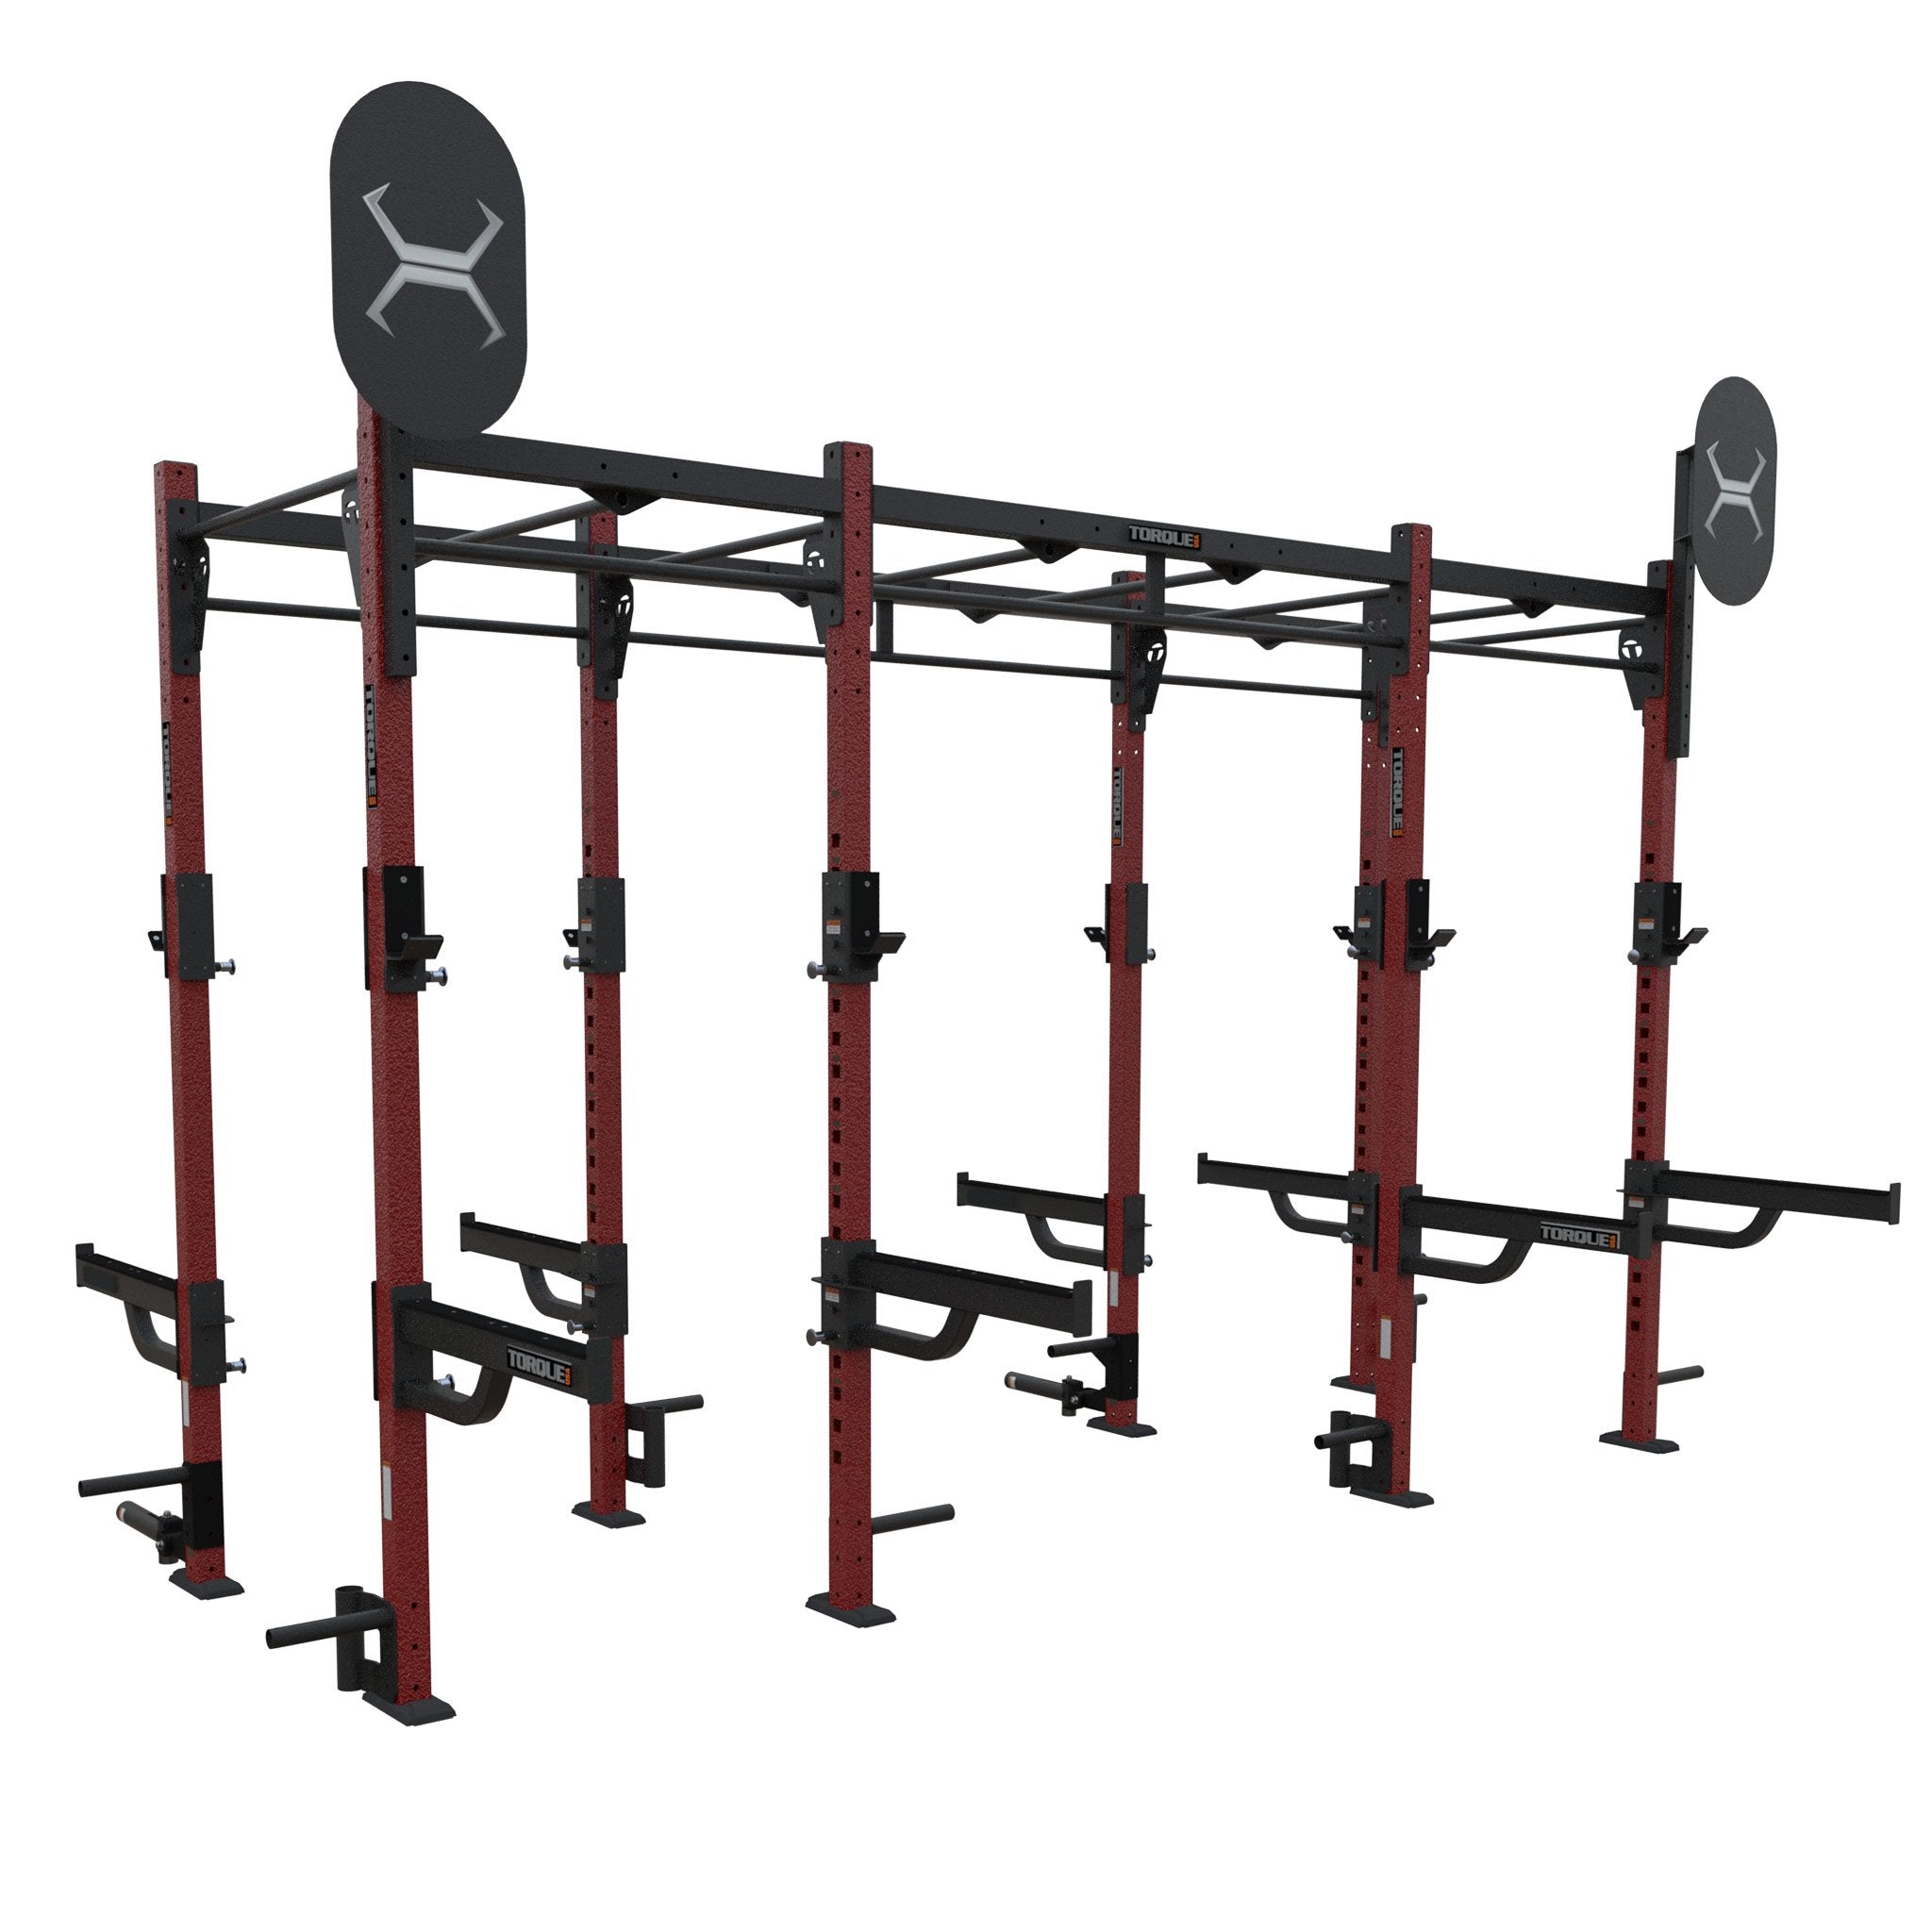 High Squat Rack With Pull-Up Bar - Torque Fitness